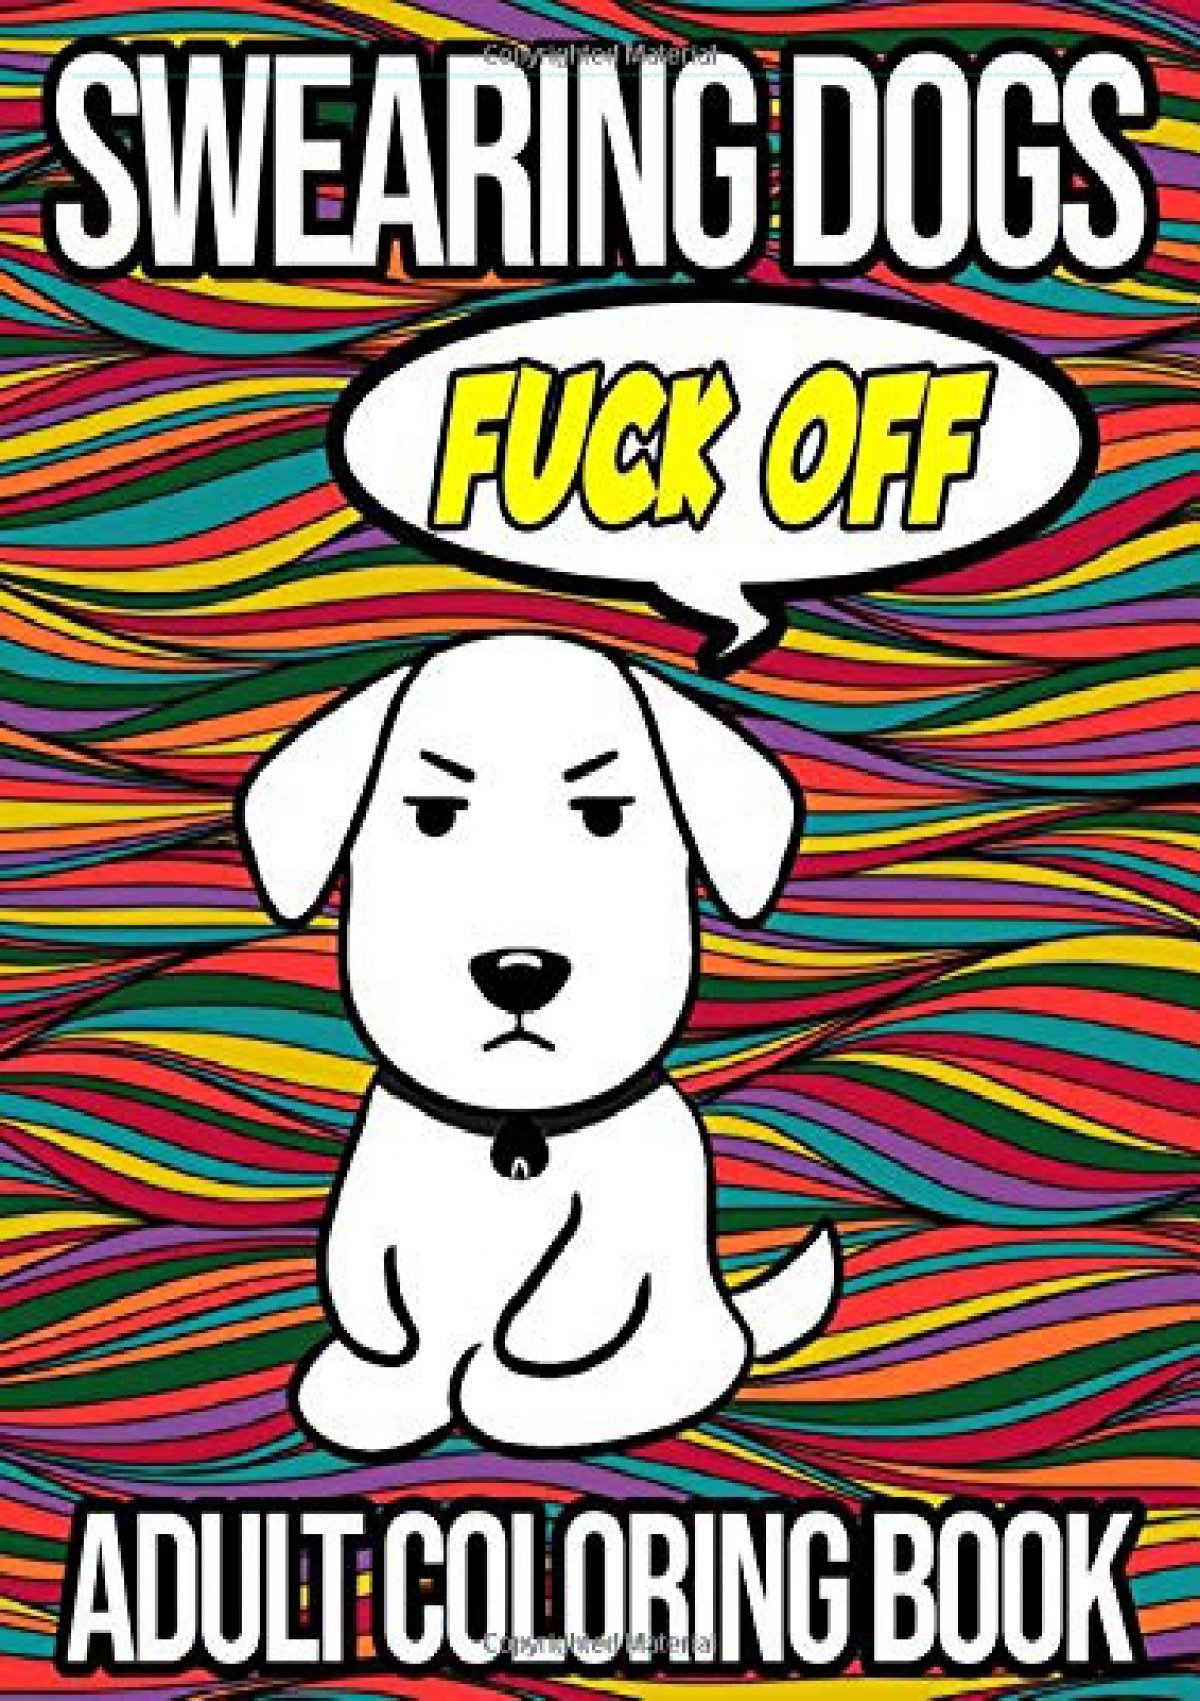 Download Pdf Swearing Dogs Adult Coloring Book A Collection Of Funny Swear Coloring Pages With Dogs And Other Animals Free